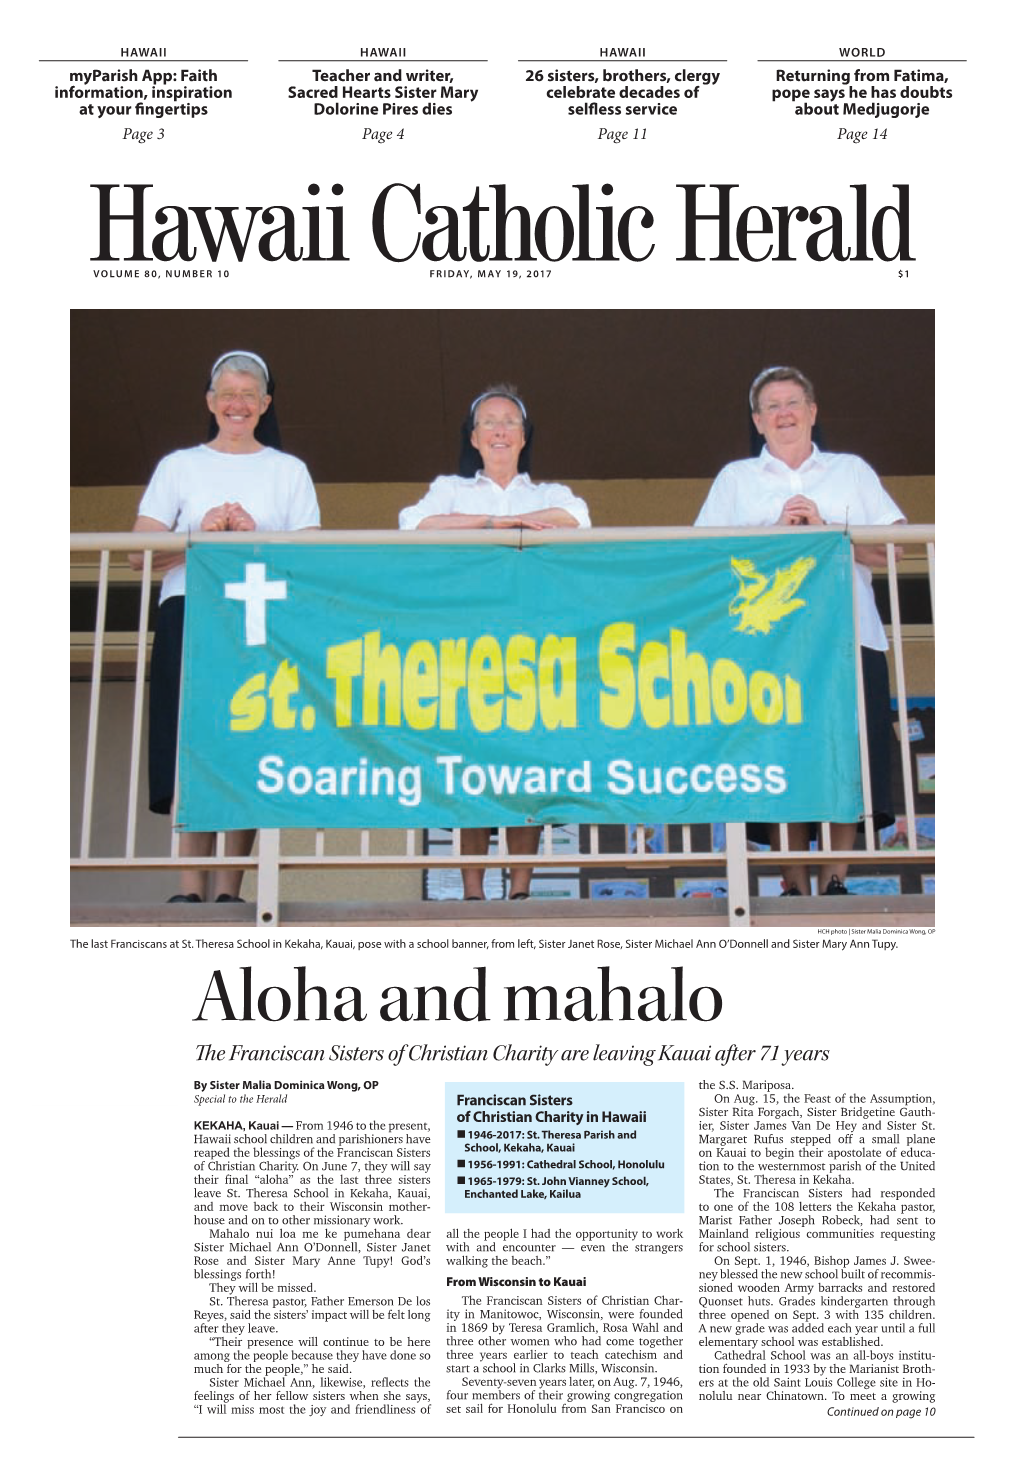 Aloha and Mahalo the Franciscan Sisters of Christian Charity Are Leaving Kauai After 71 Years